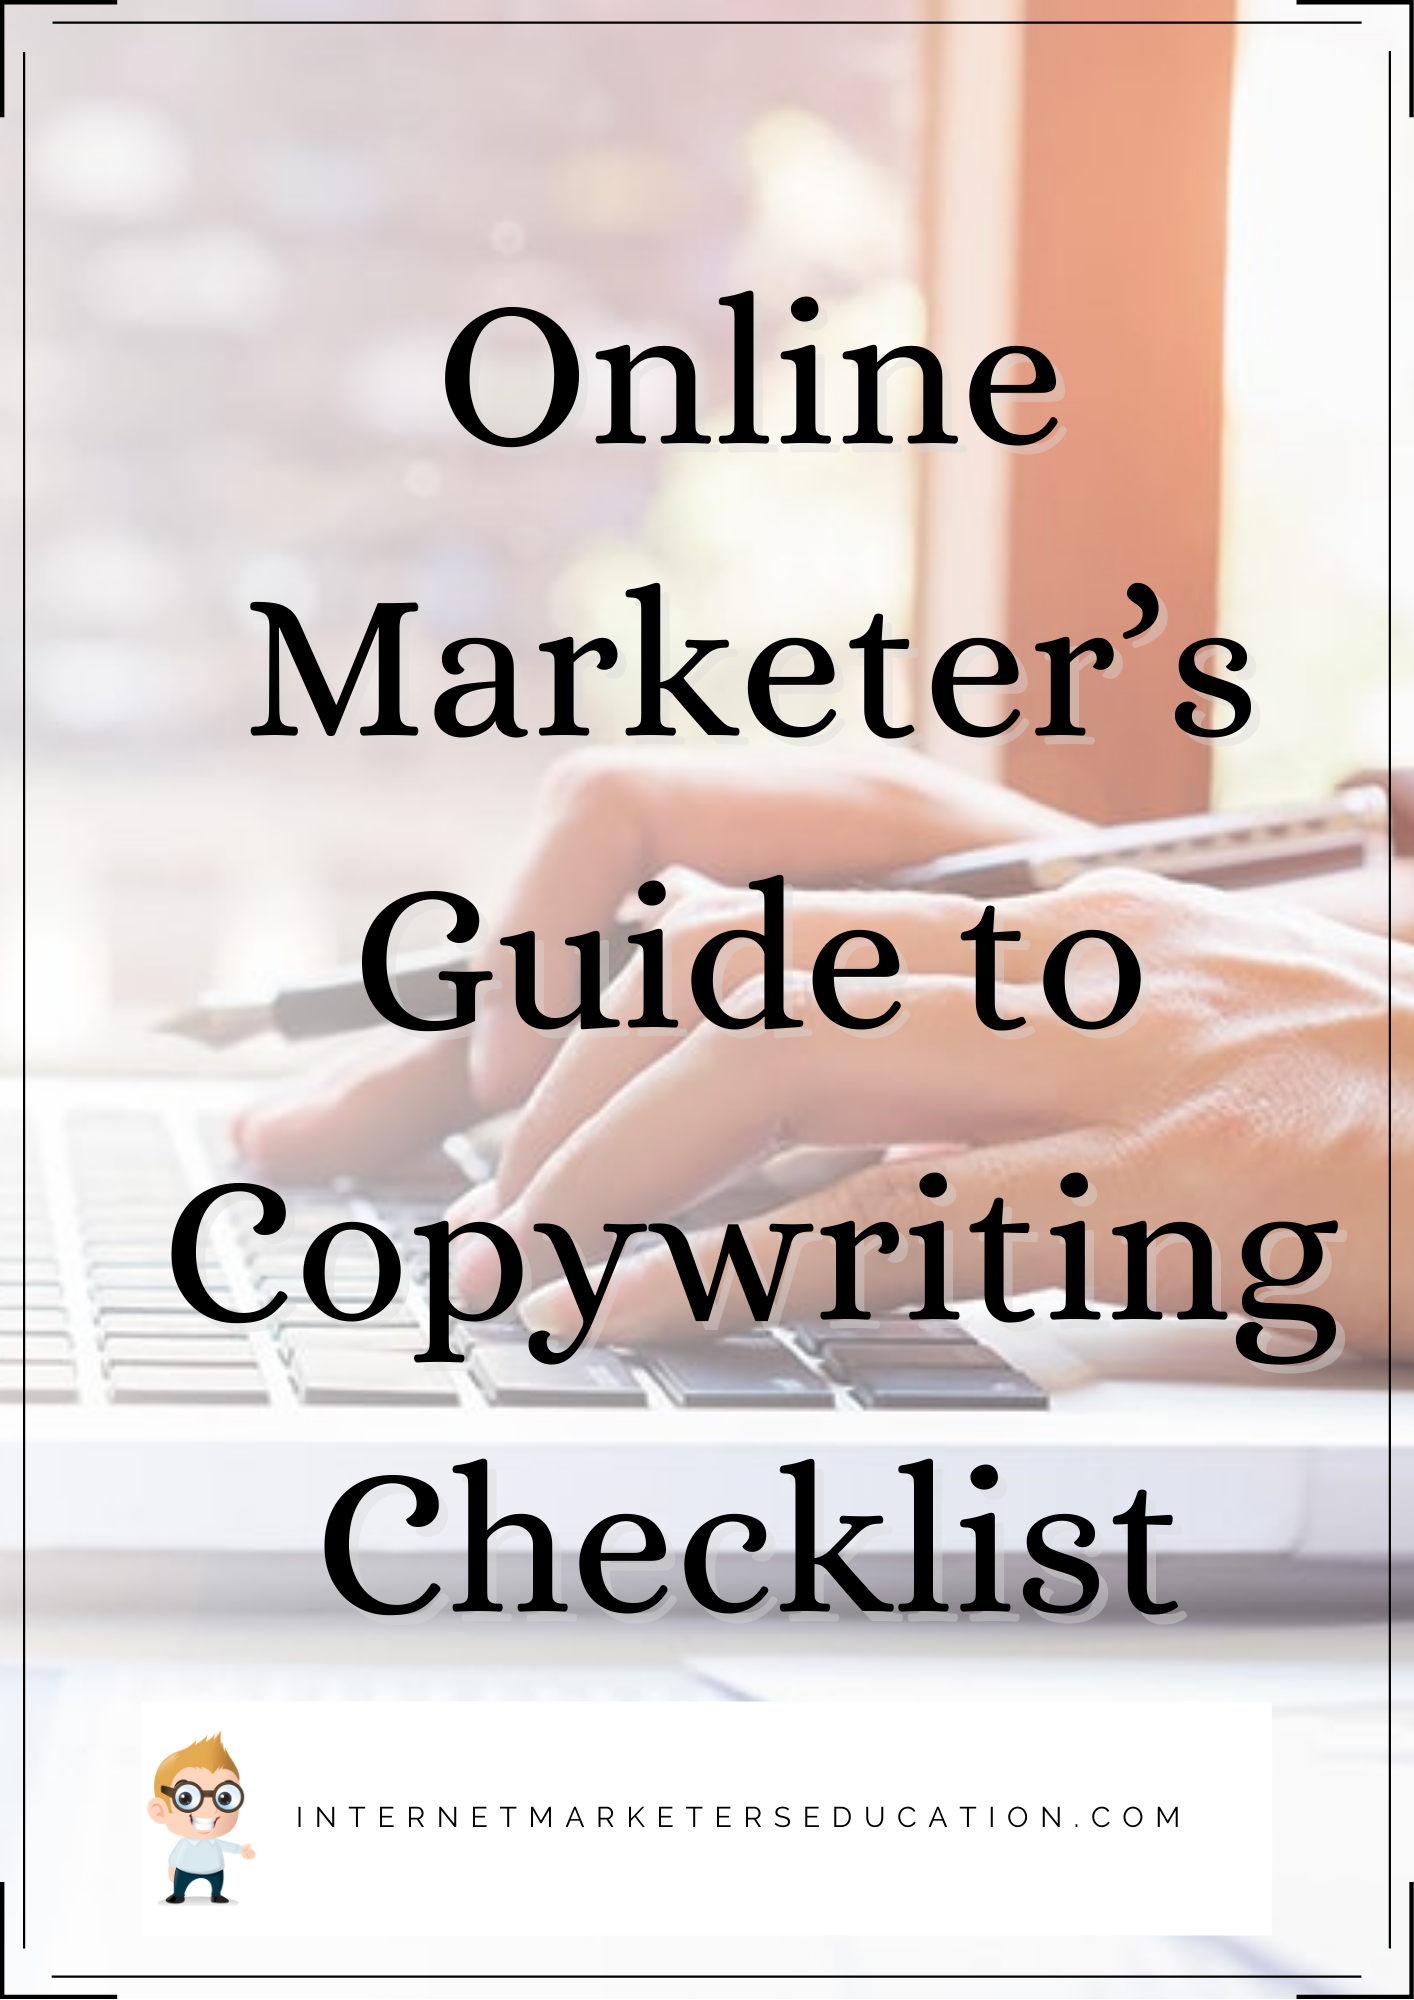 Online Marketer’s Guide to Copywriting Checklist Course